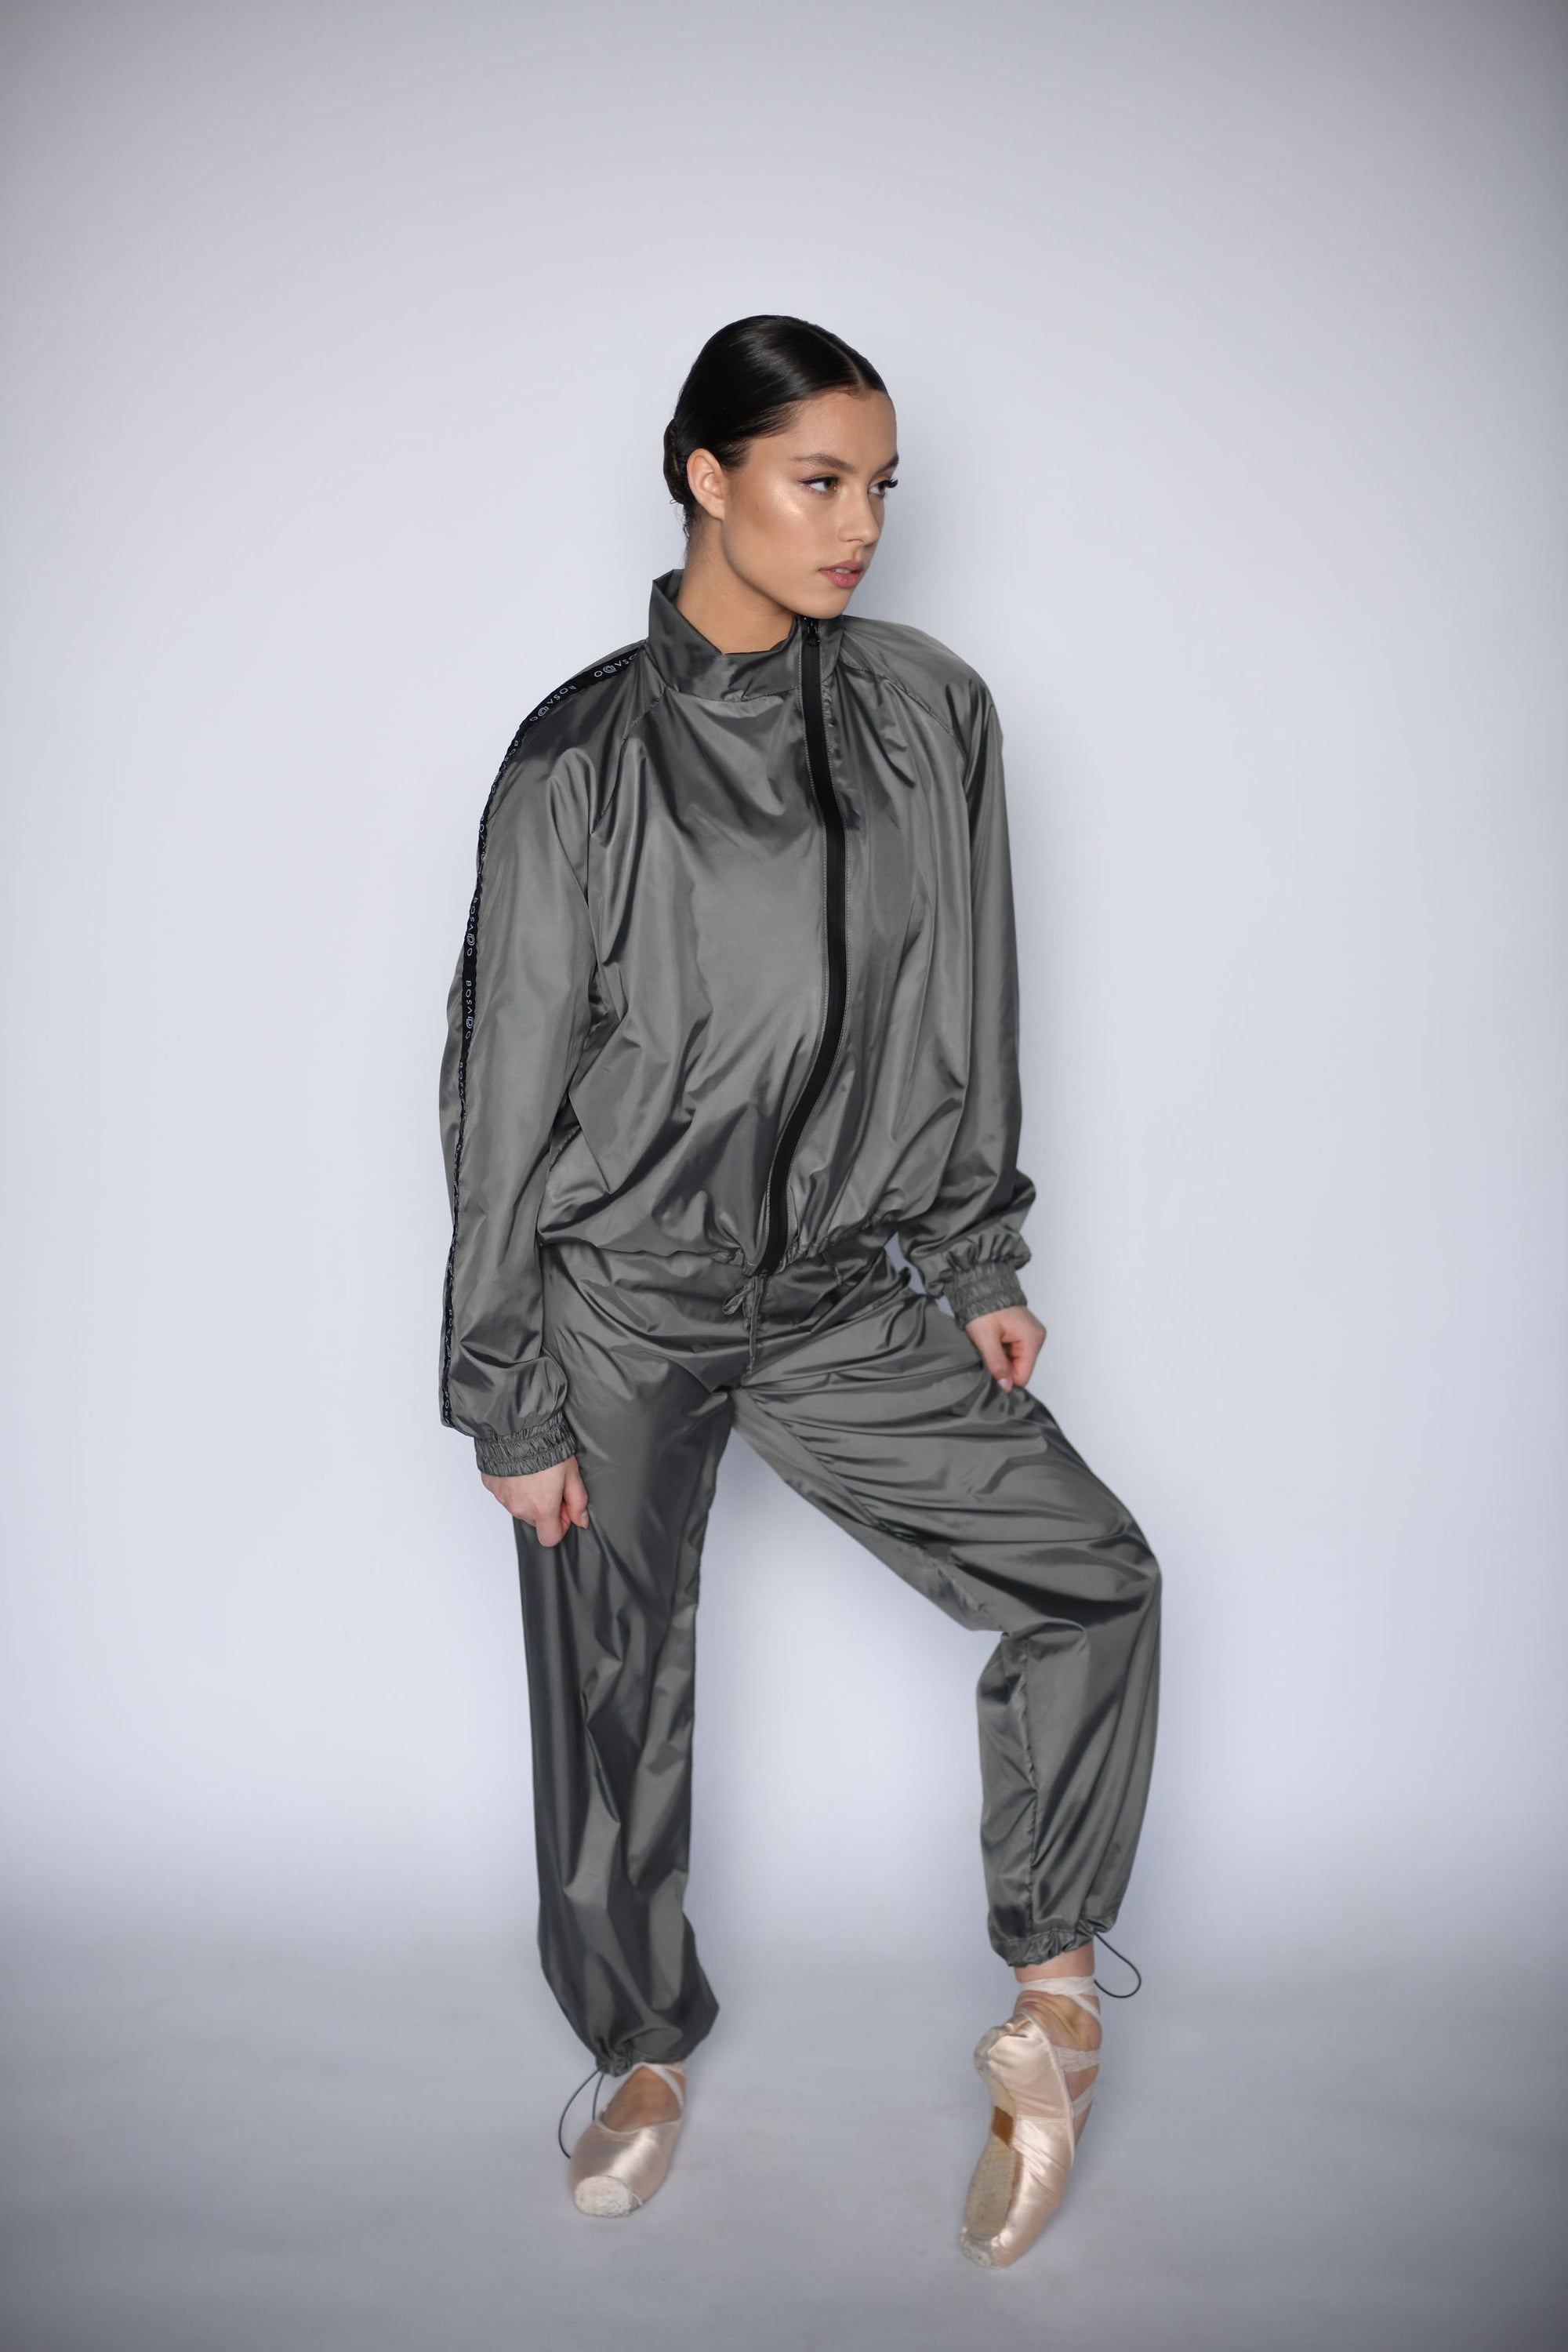 NEW URBAN SWAN COLLECTION S/S 23 | Dark concrete sports suit with pants